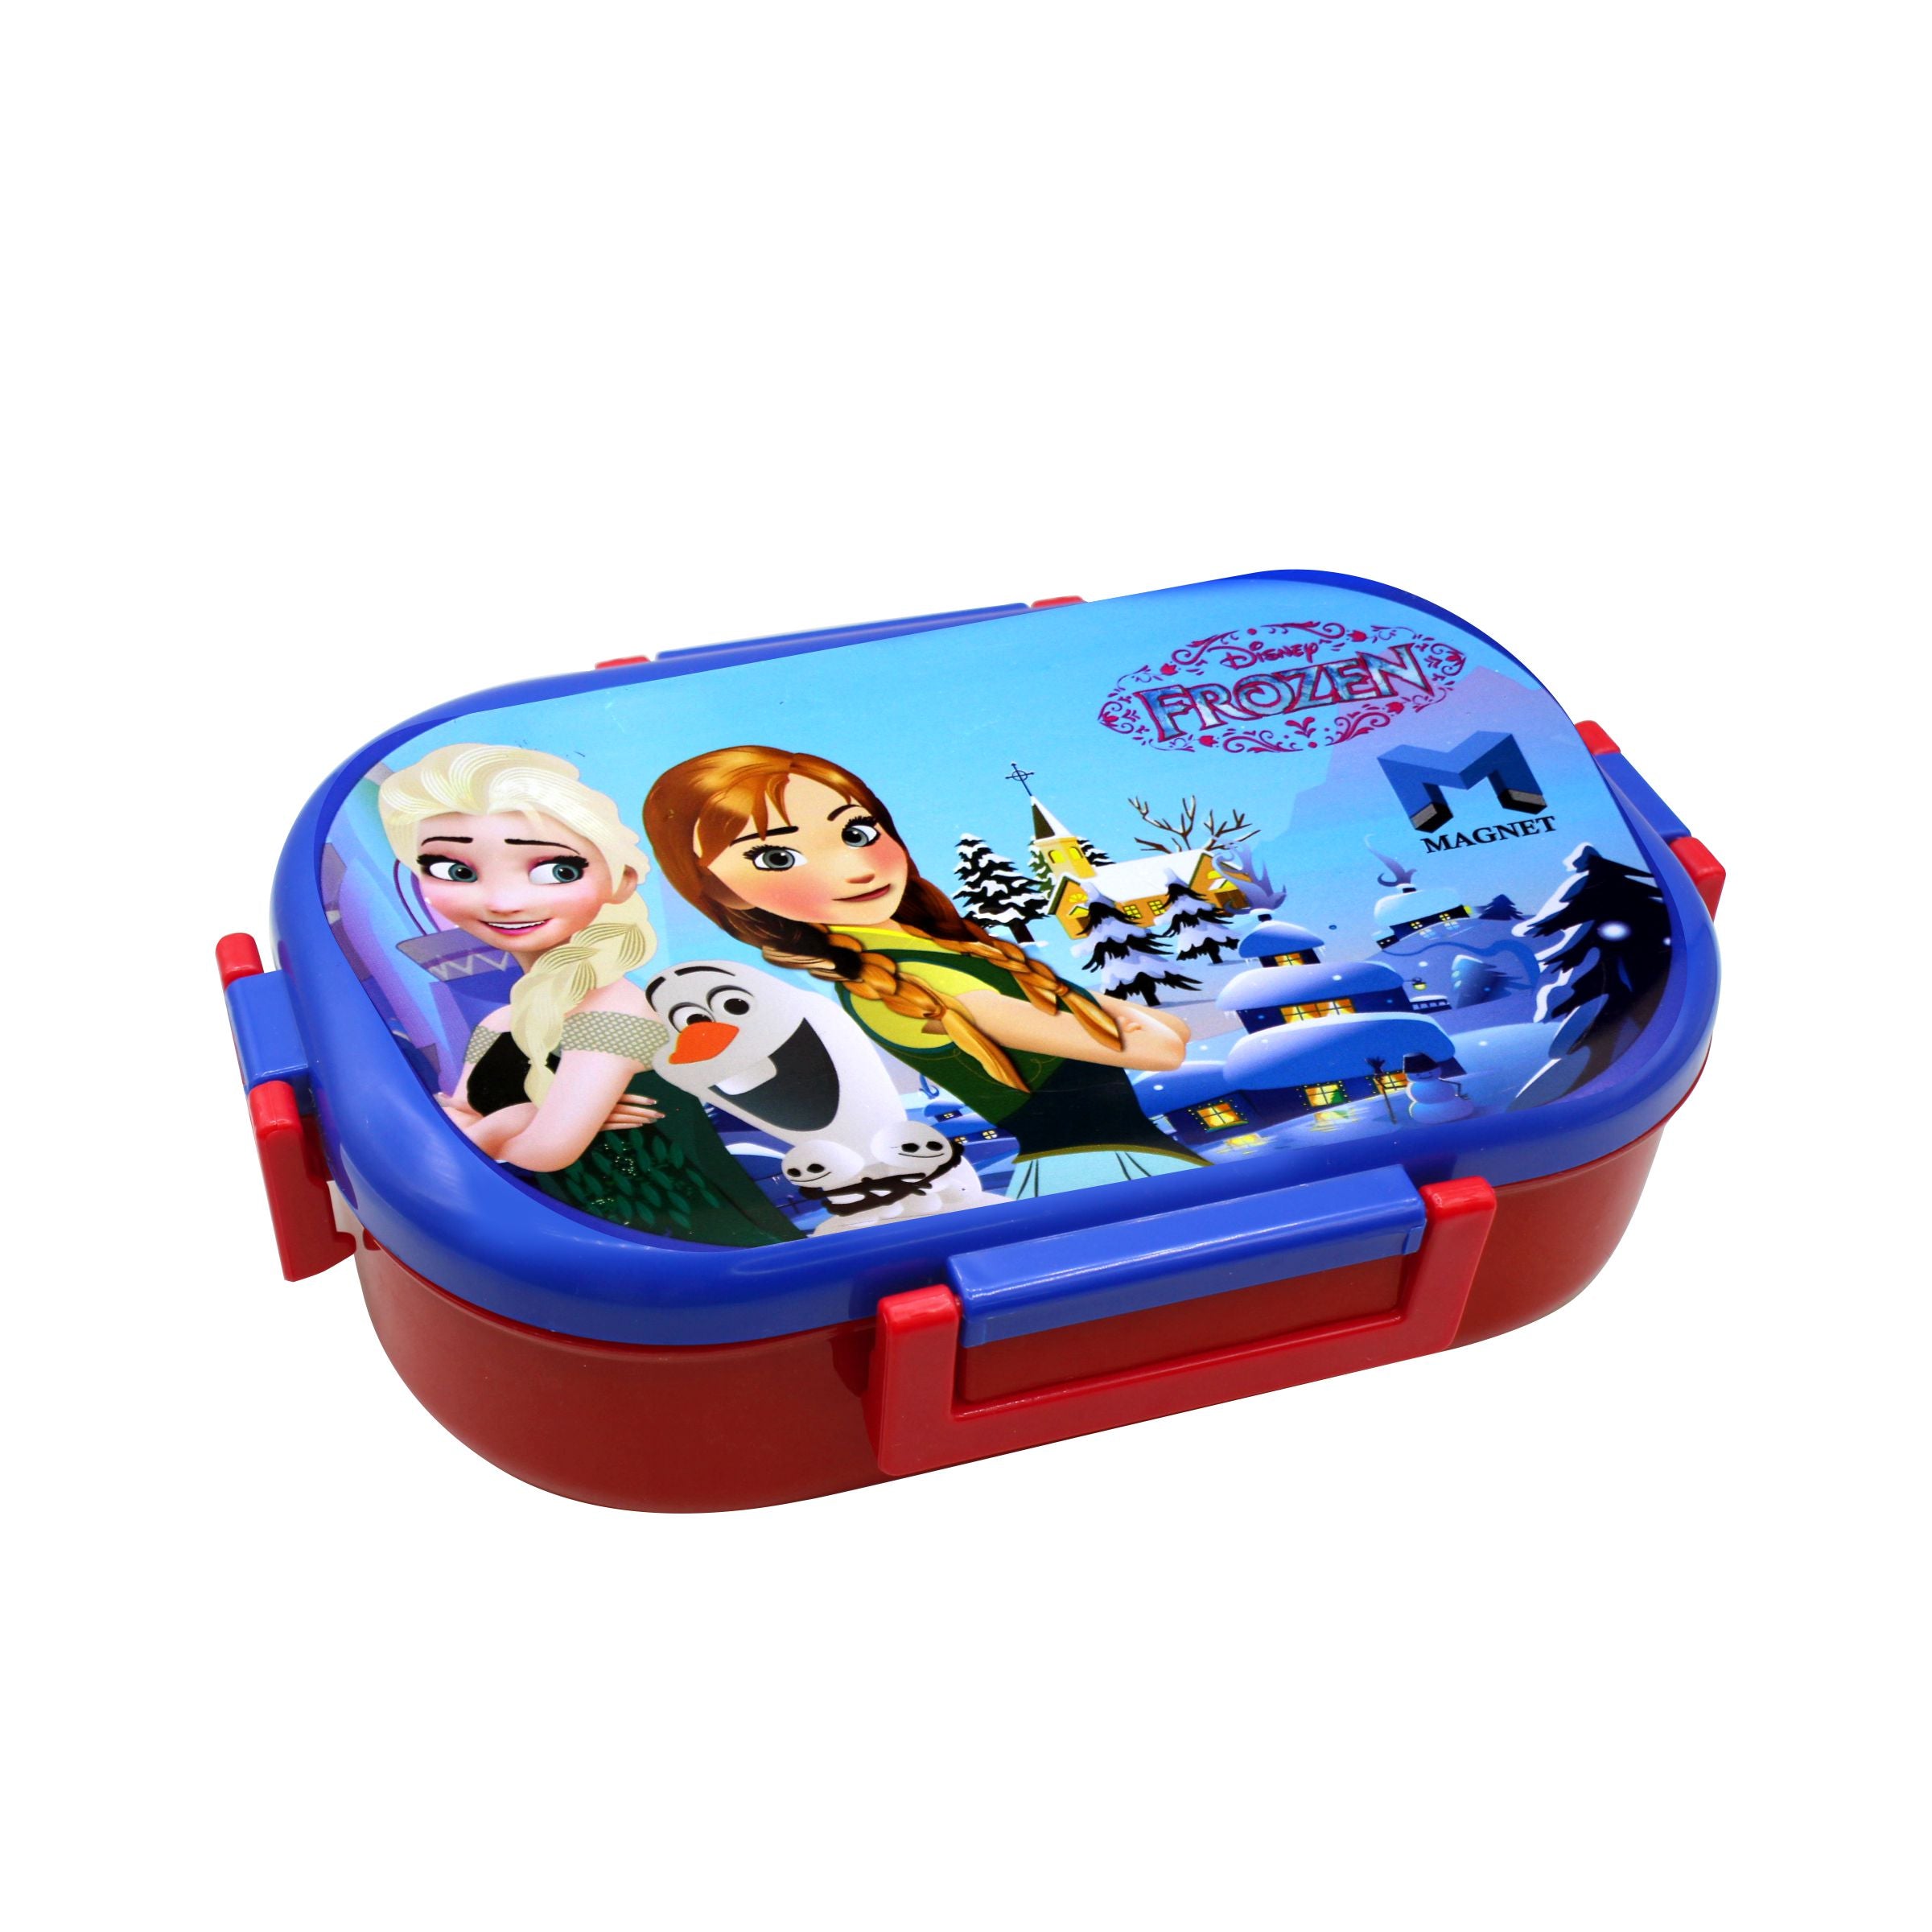 Frozen Character Premium Quality Lunch Box For Kids